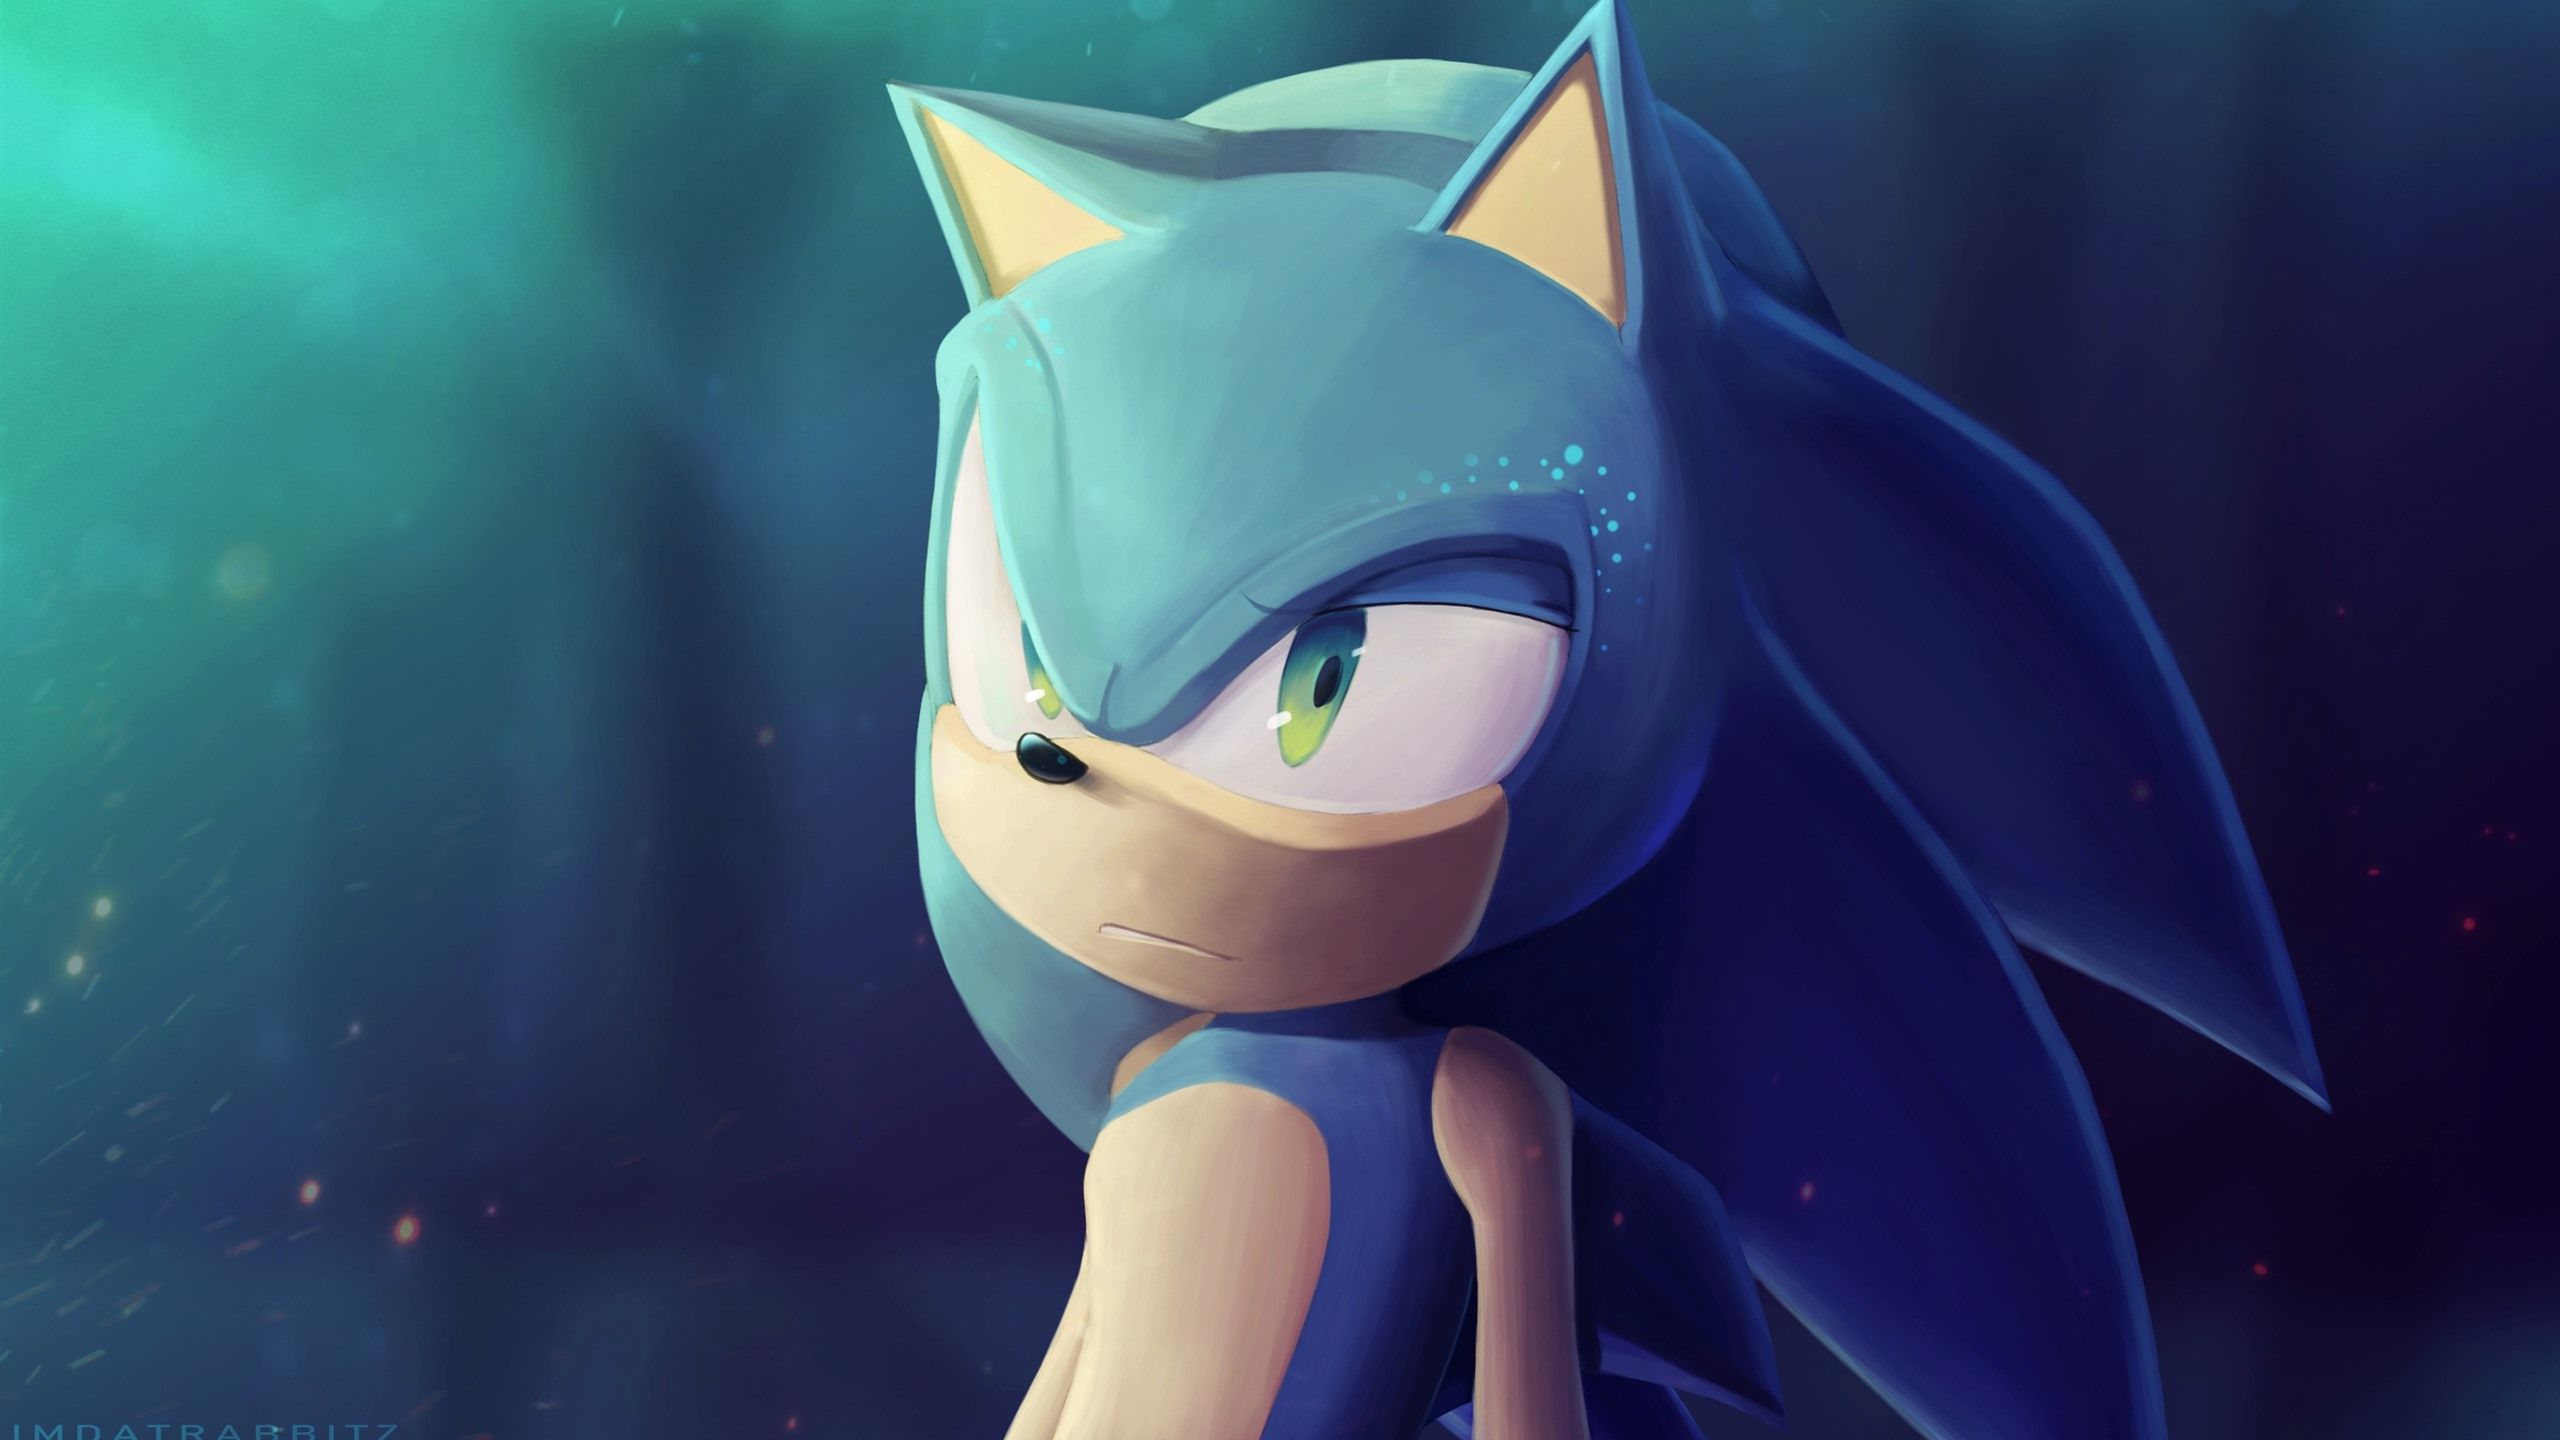 Wallpaper Sonic the Hedgehog, art picture 2560x1600 HD Picture, Image